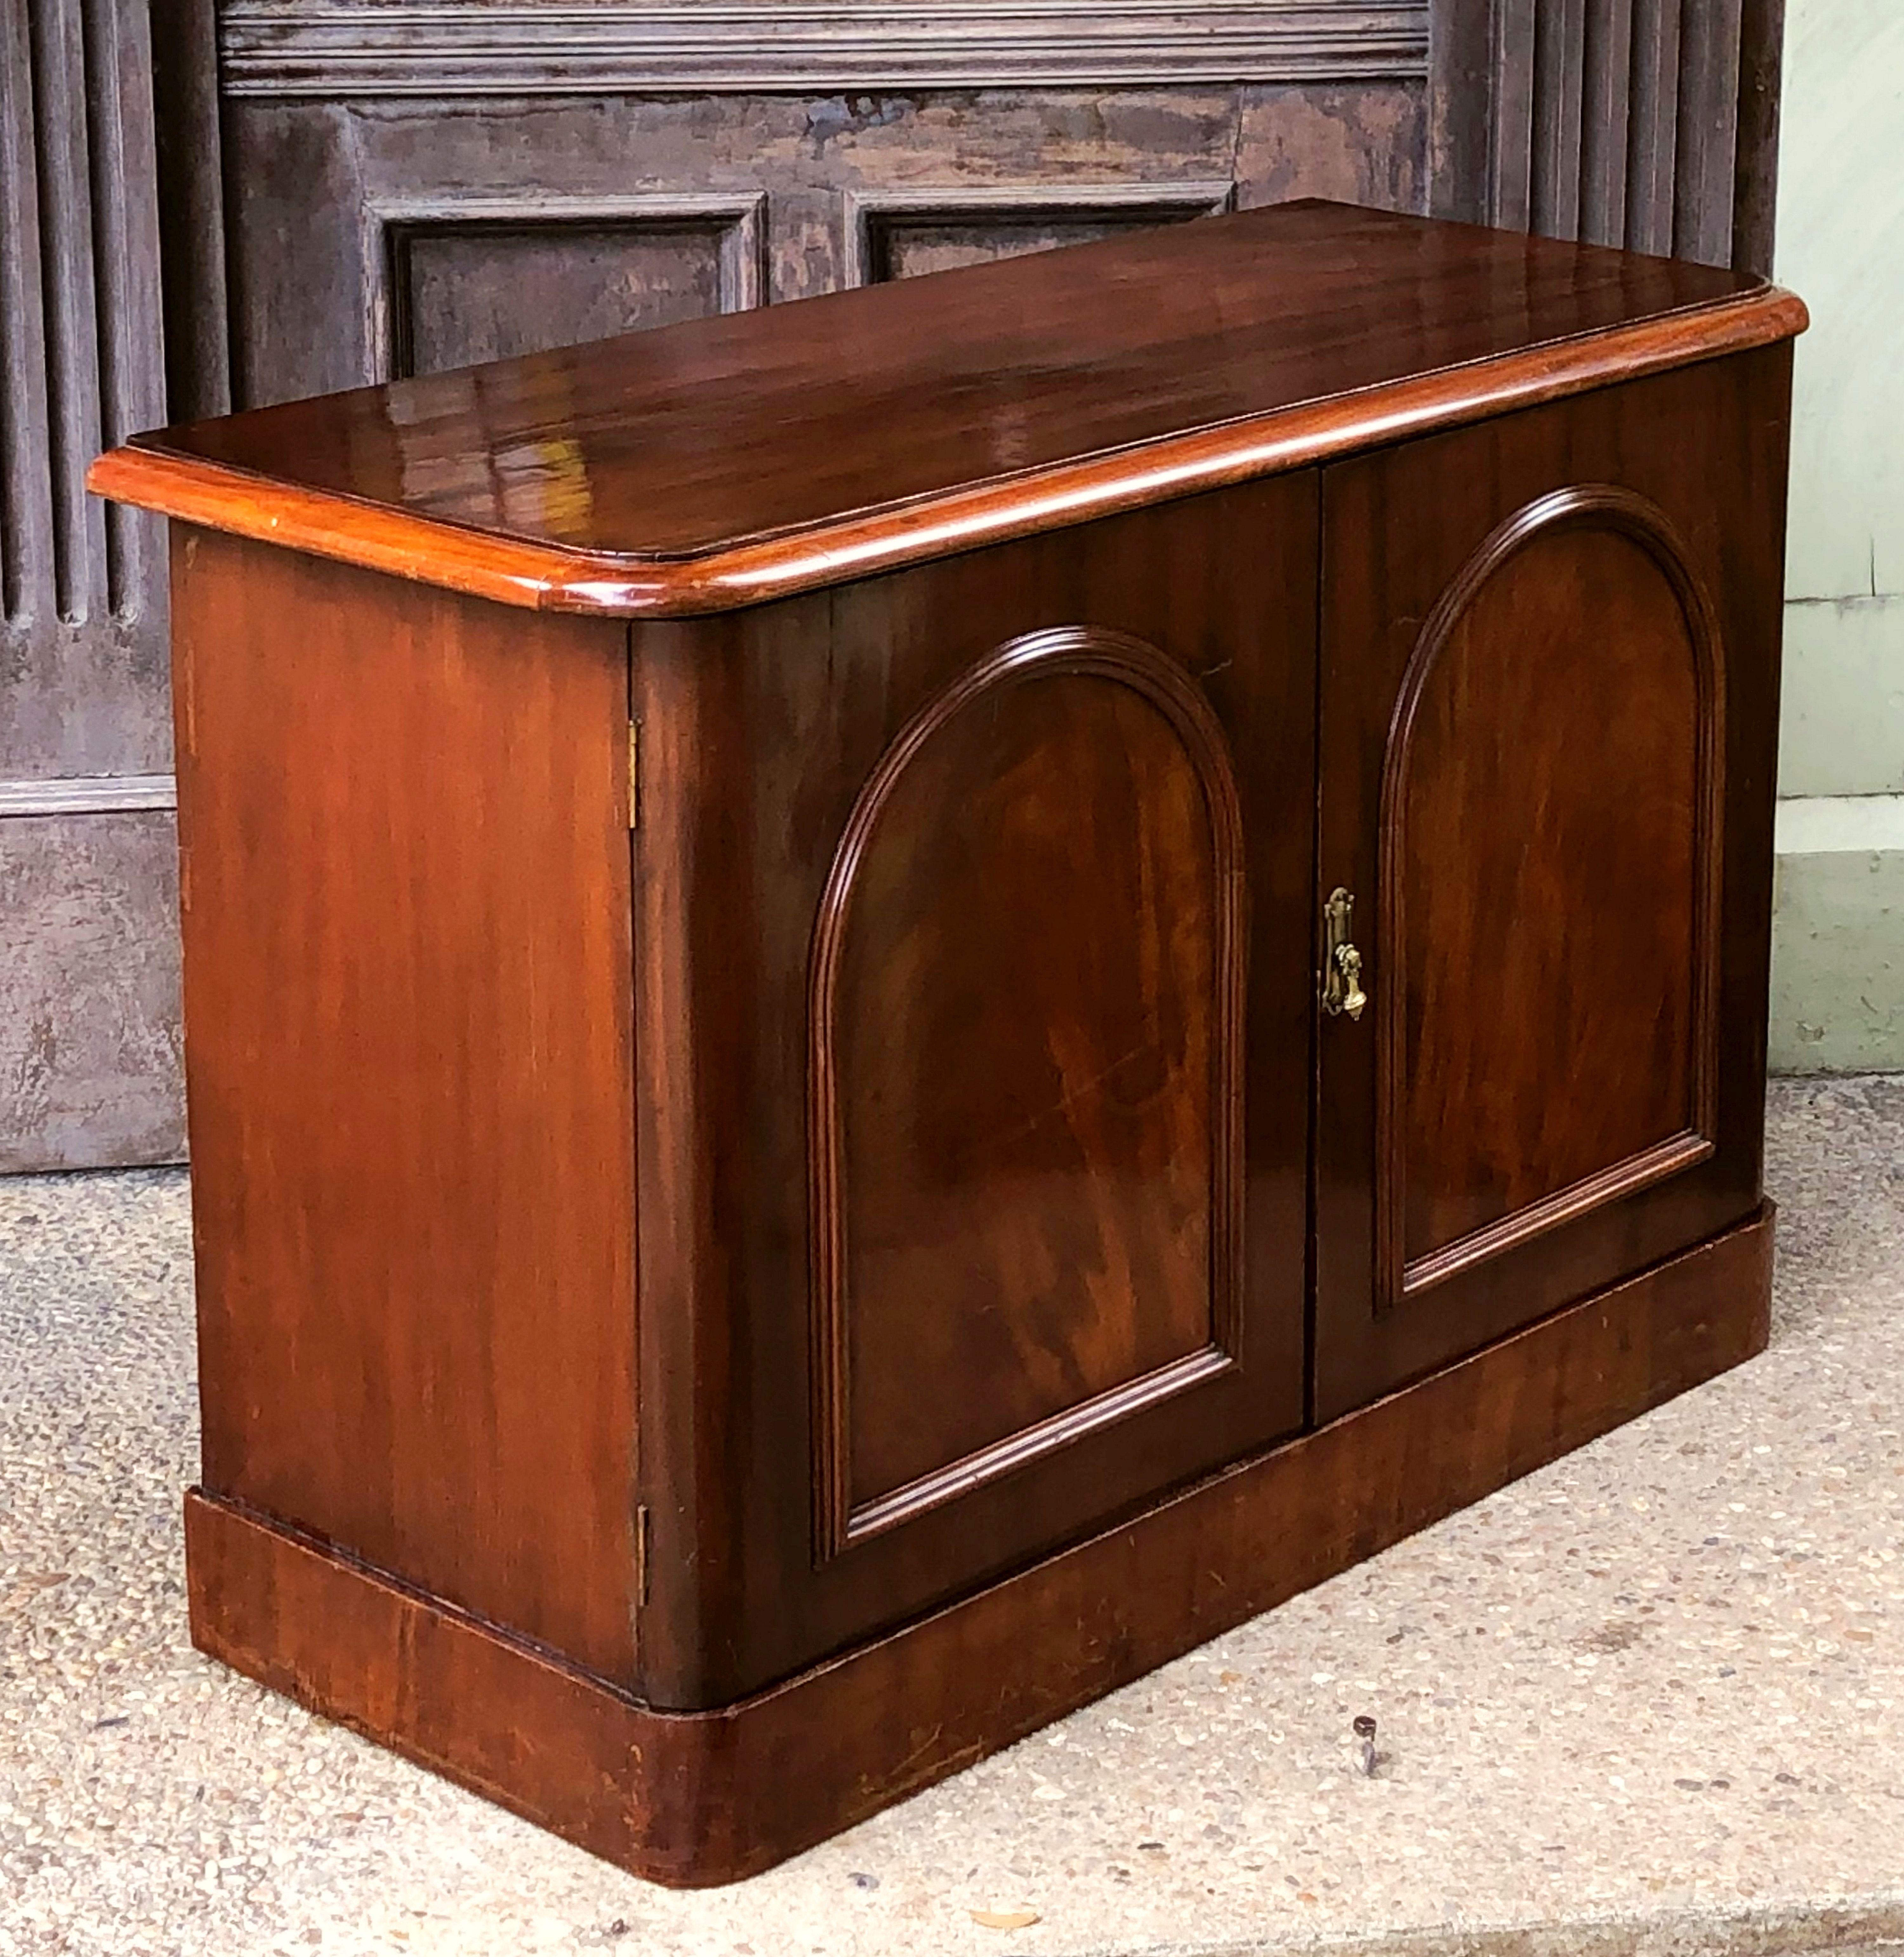 Metal English Two-Door Cabinet or Chiffonier of Mahogany from the 19th Century